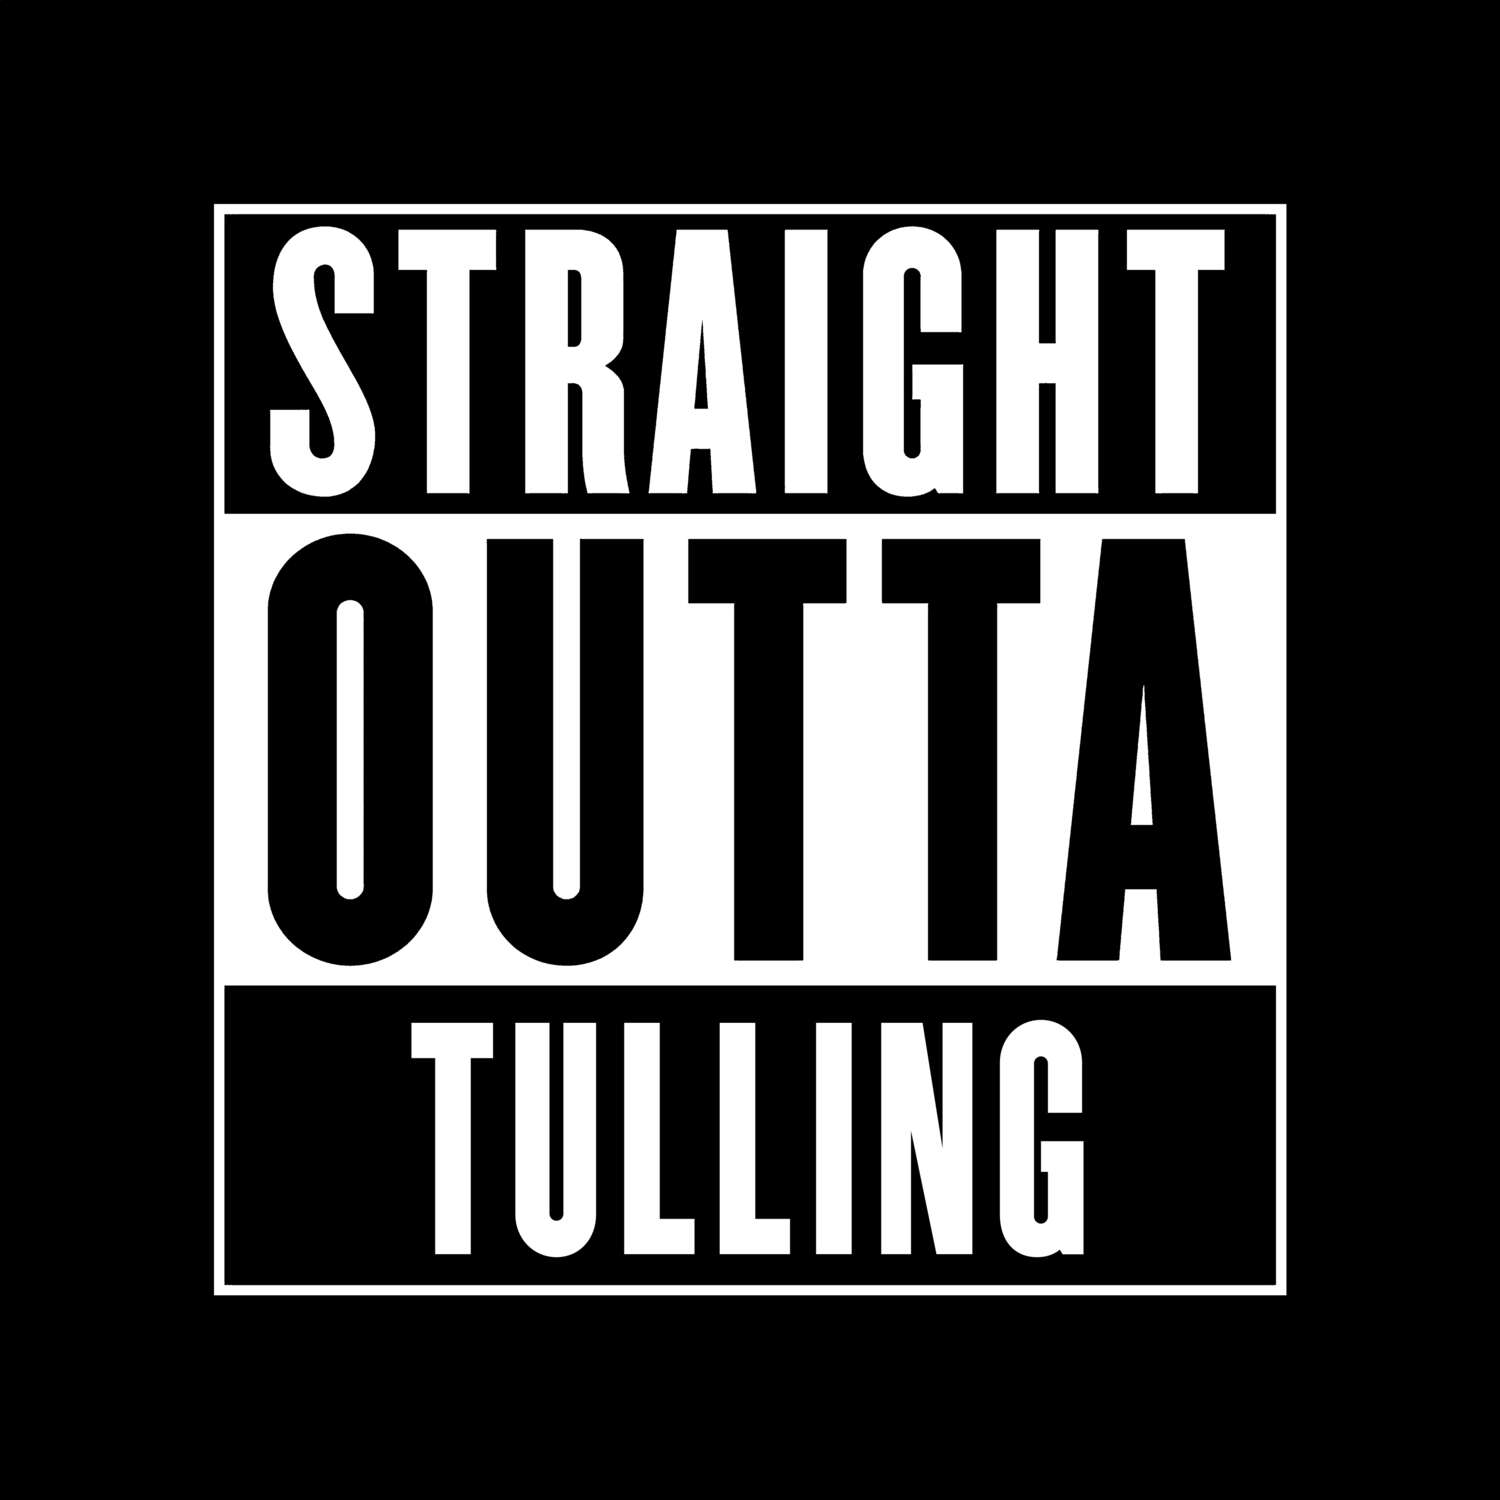 Tulling T-Shirt »Straight Outta«